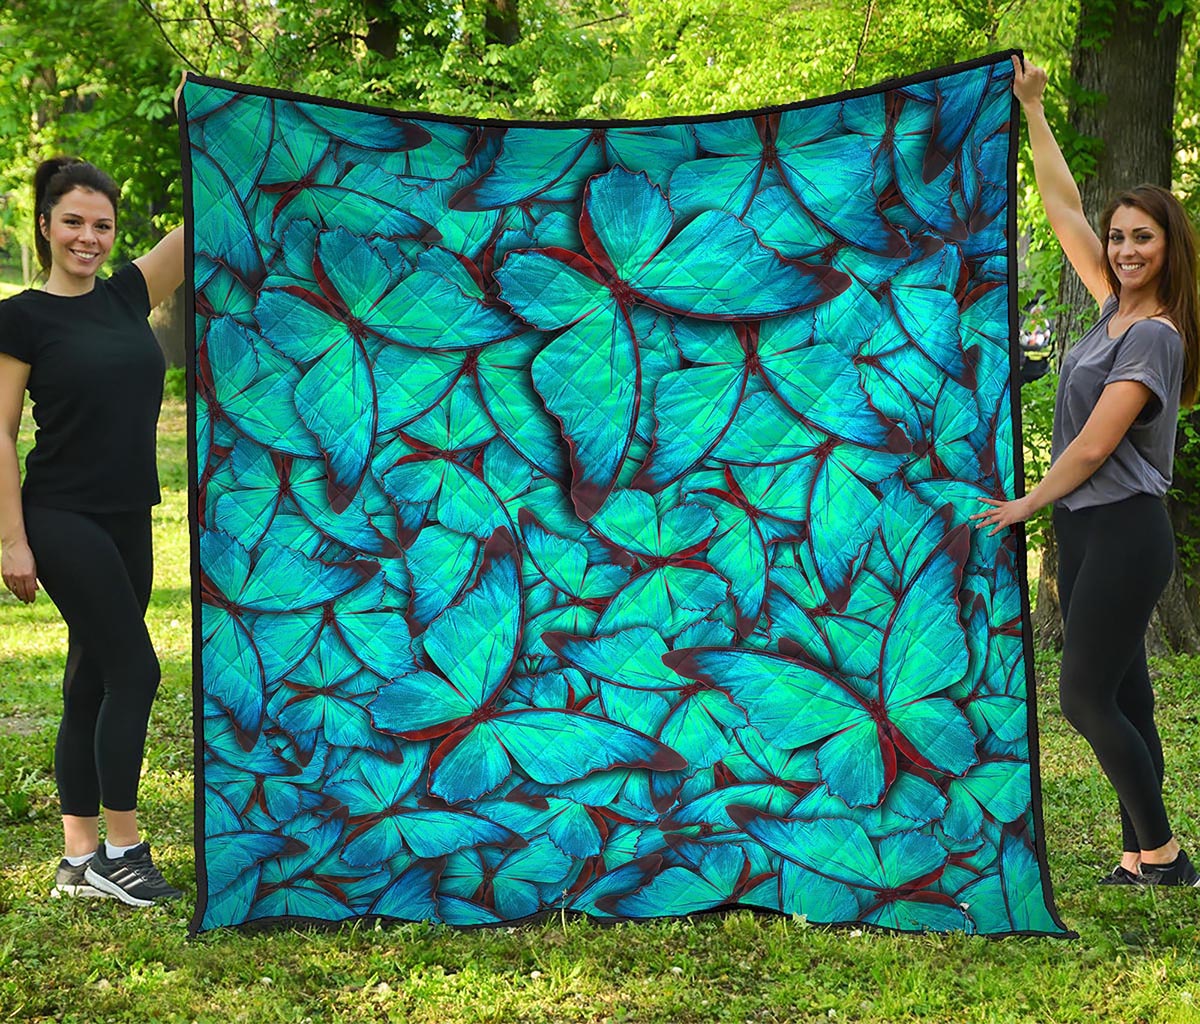 Turquoise Butterfly Pattern Print Quilt